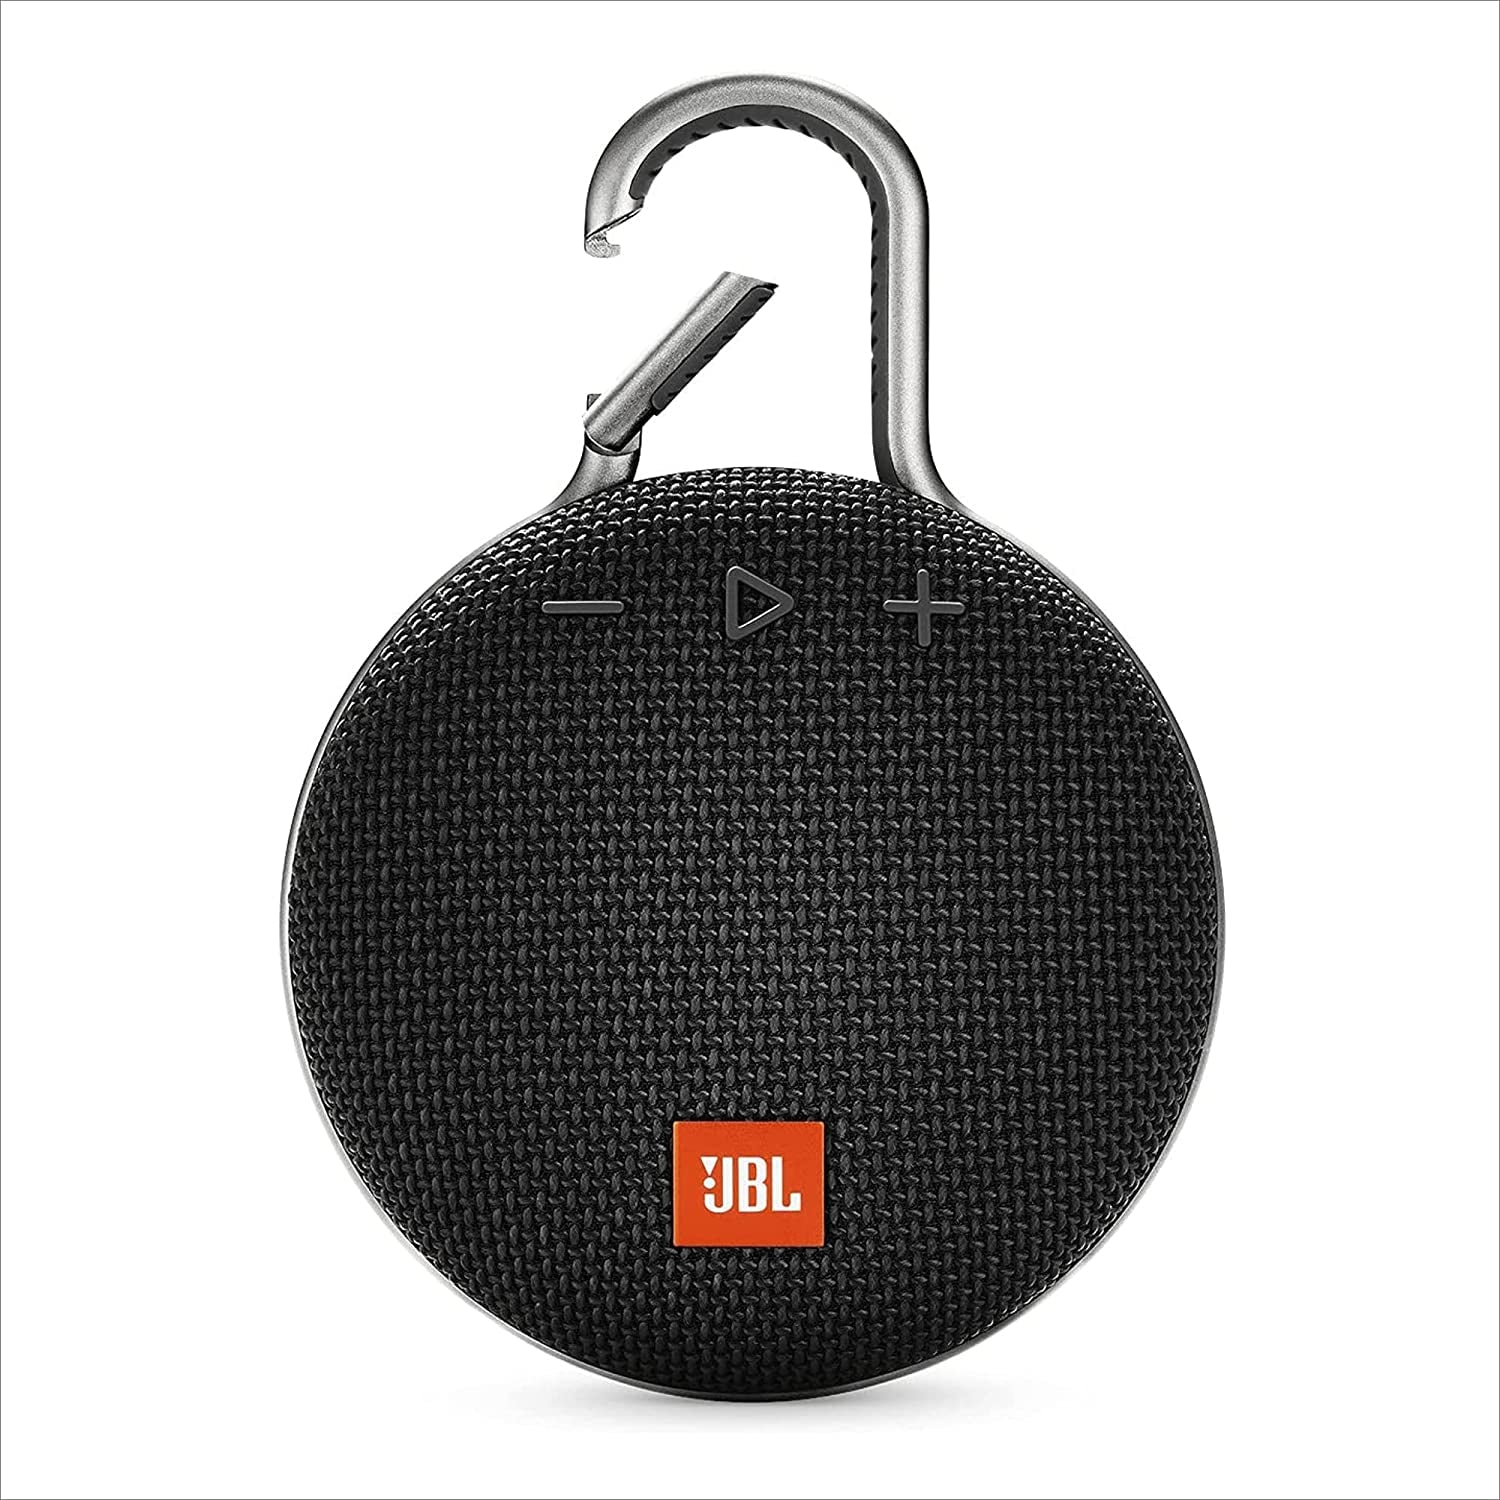 Clip 3, Black - Waterproof, Durable & Portable Bluetooth Speaker - up to 10 Hours of Play - Includes Noise-Cancelling Speakerphone & Wireless Streaming